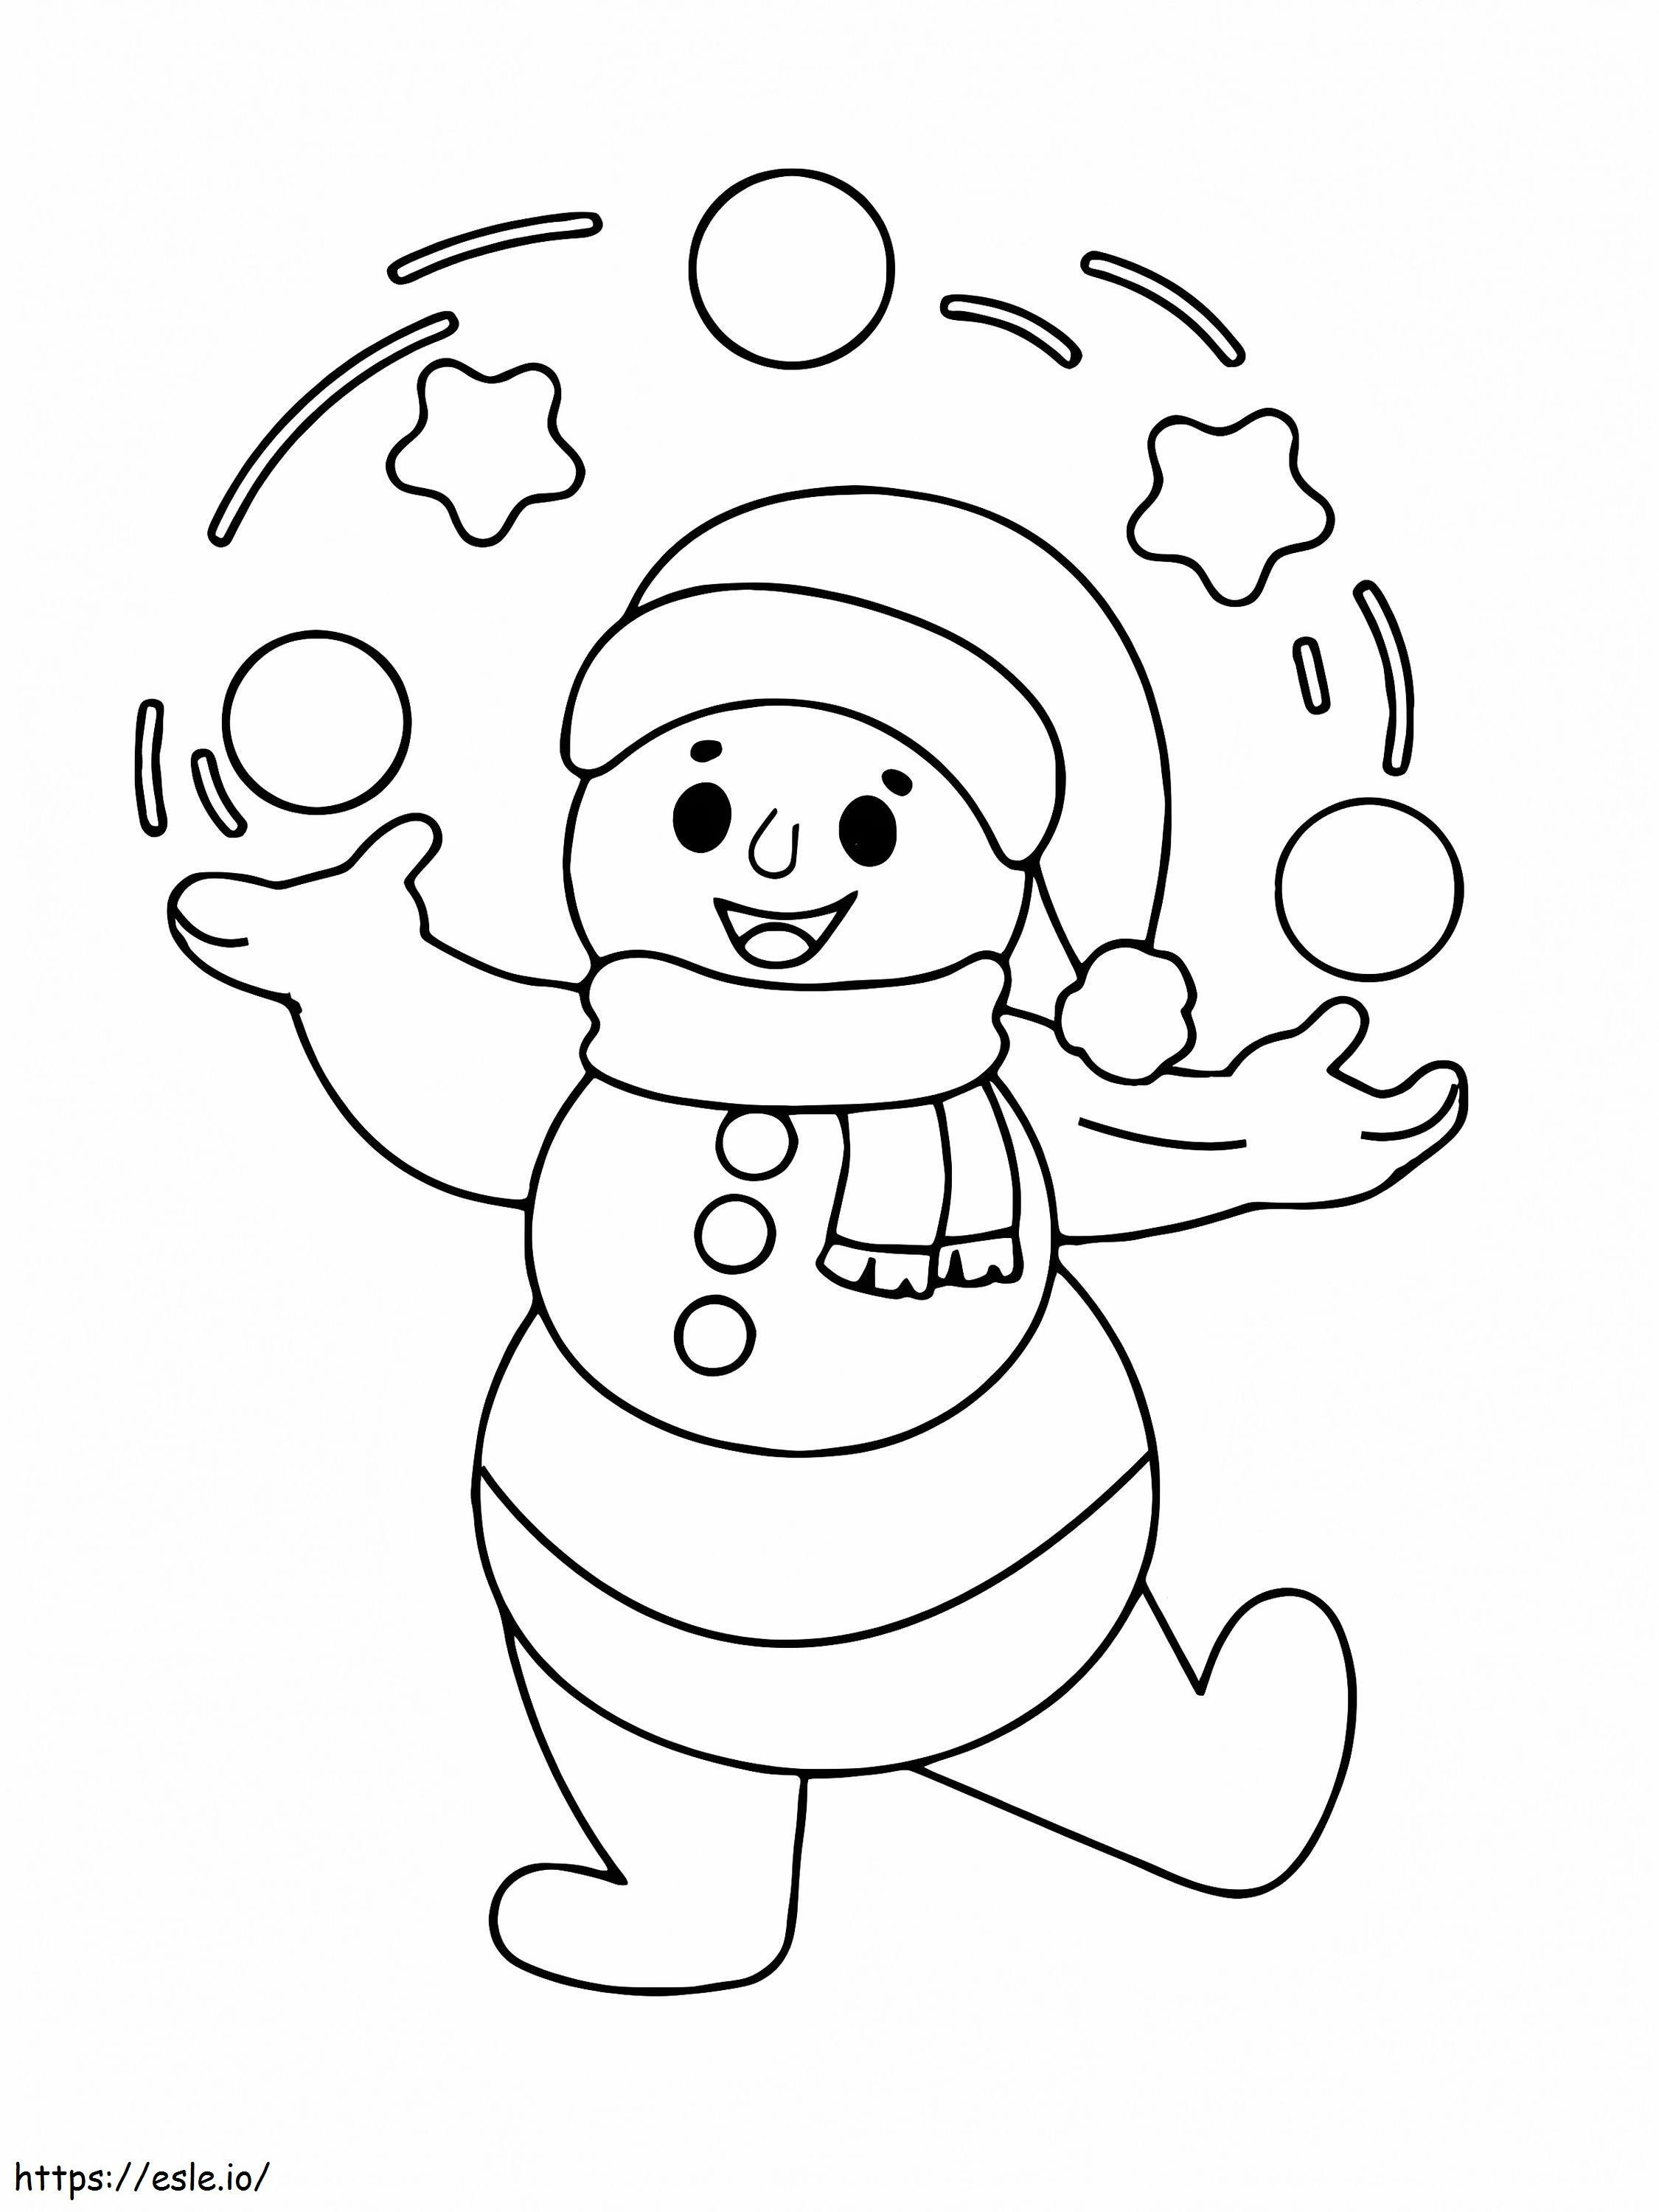 Playful Snowman coloring page